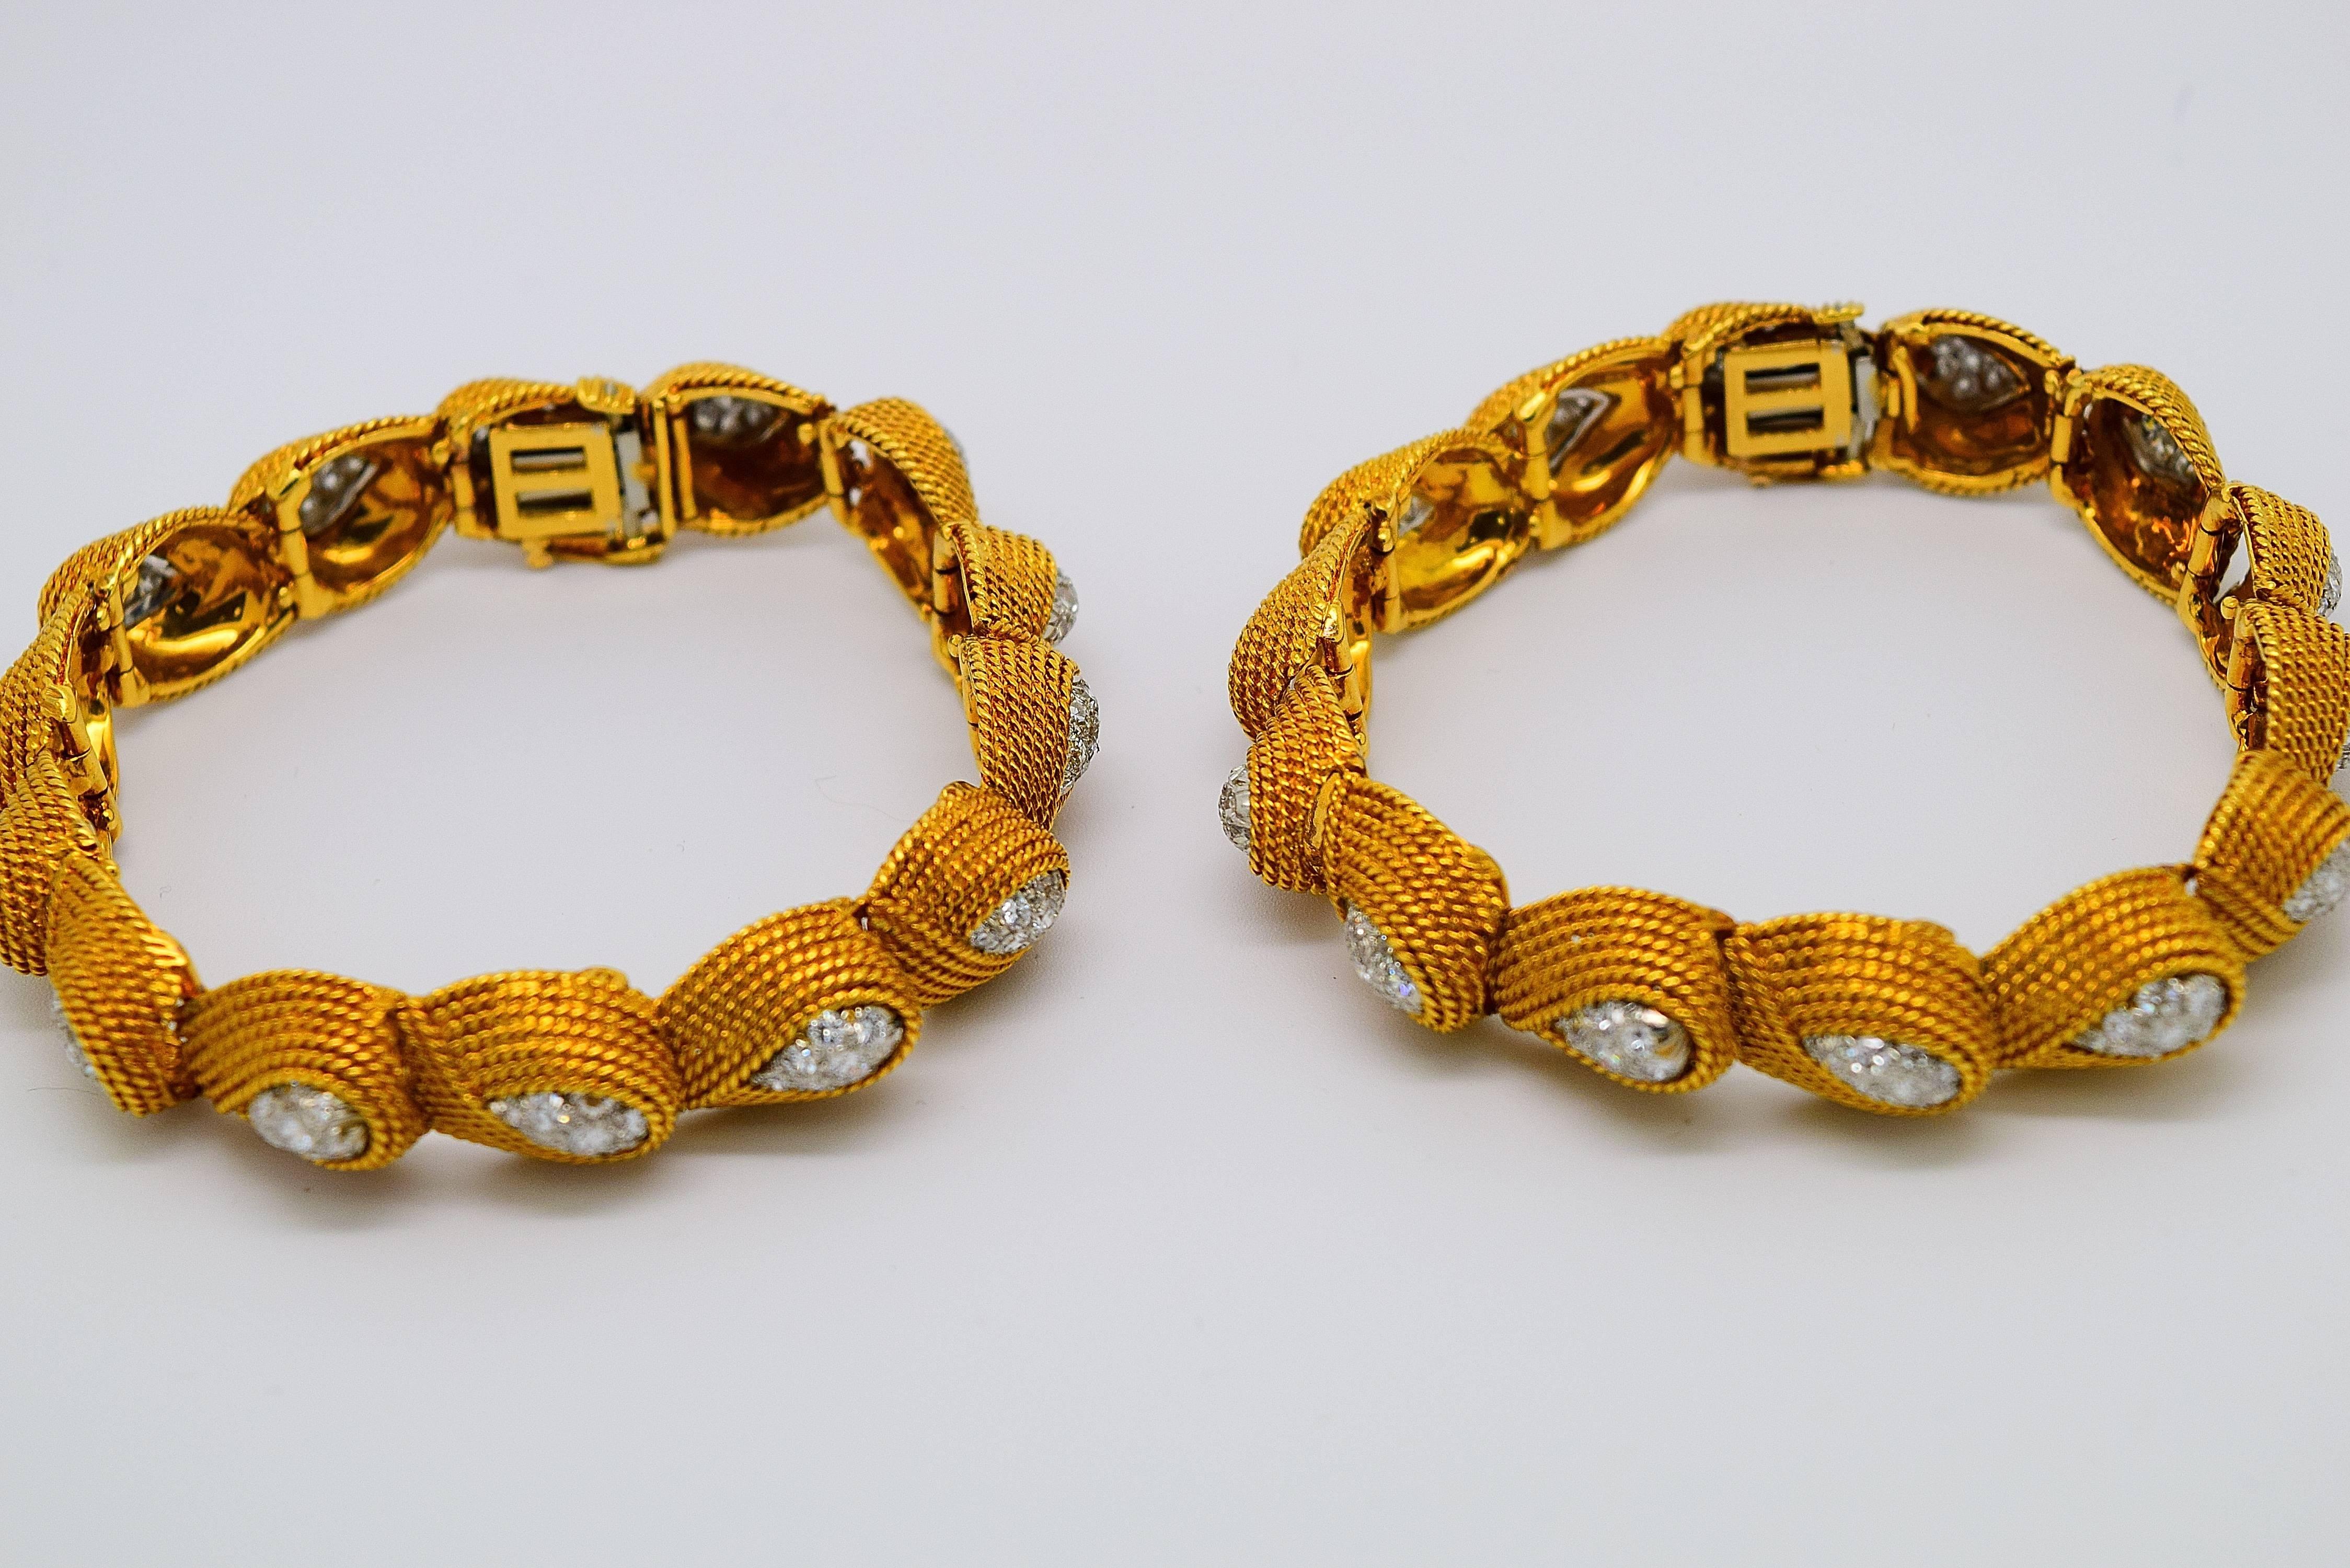 A matched pair of David Webb 18k yellow gold, platinum and diamond bracelets. The round brilliant cut diamonds are set in platinum micropave style surrounded by 18k cord textured gold. The diamonds weigh approximately 6.50cttw of fine diamonds